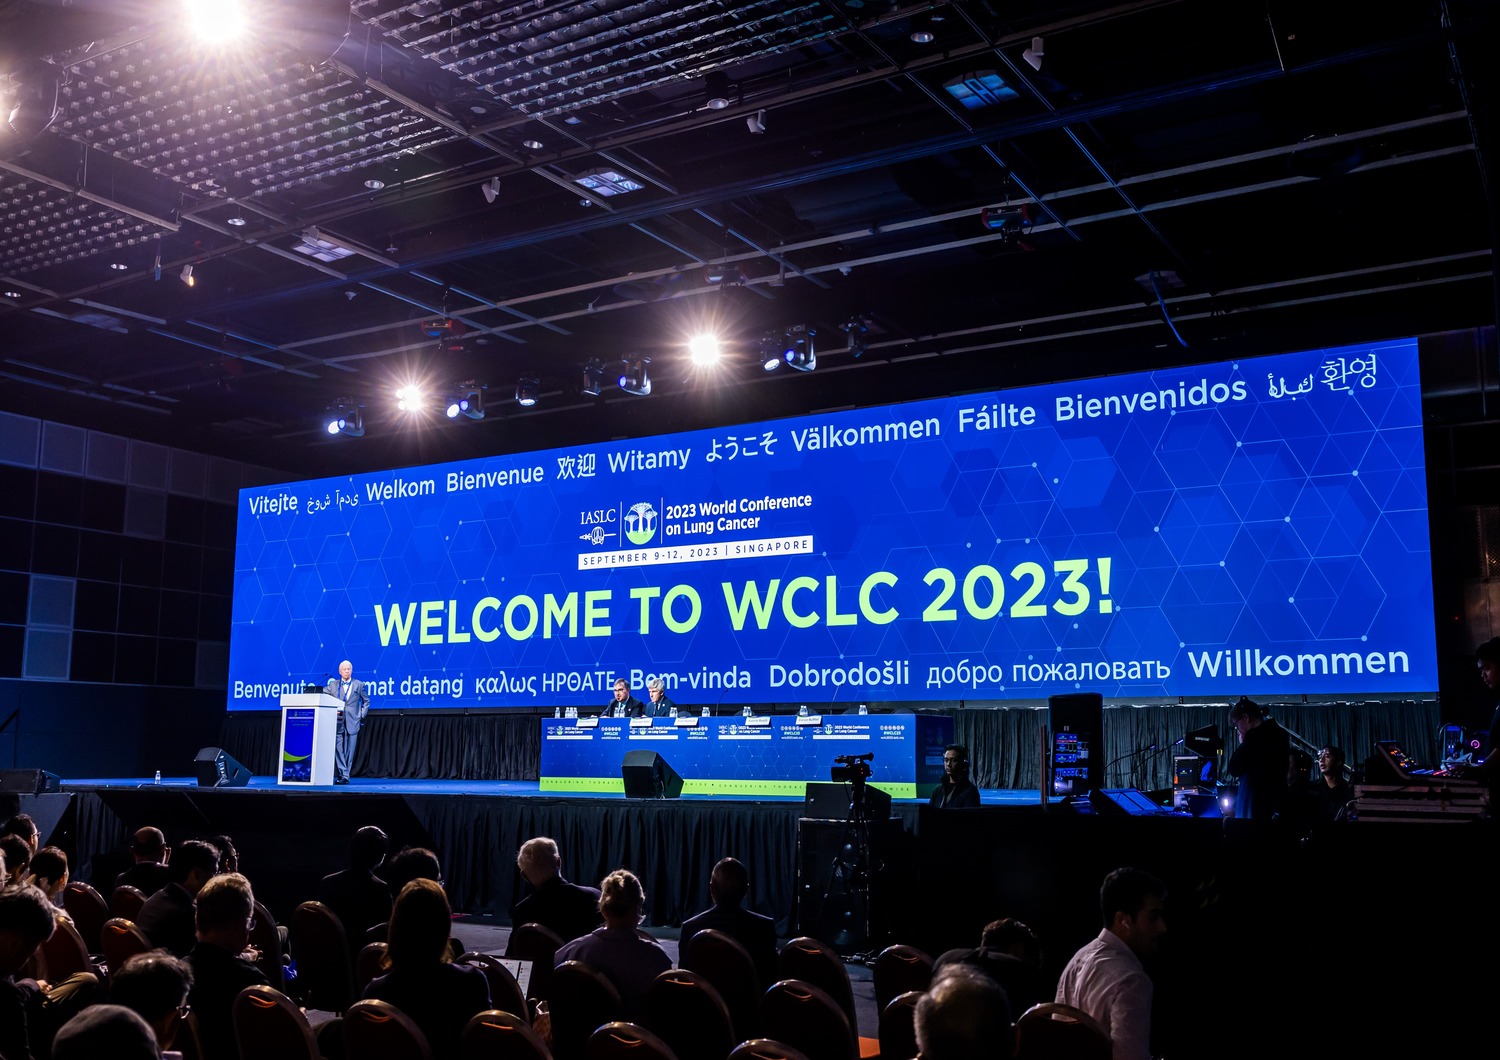 Opening session of WCLC annual congress in Singapore with the support of CTI Meeting Technology.